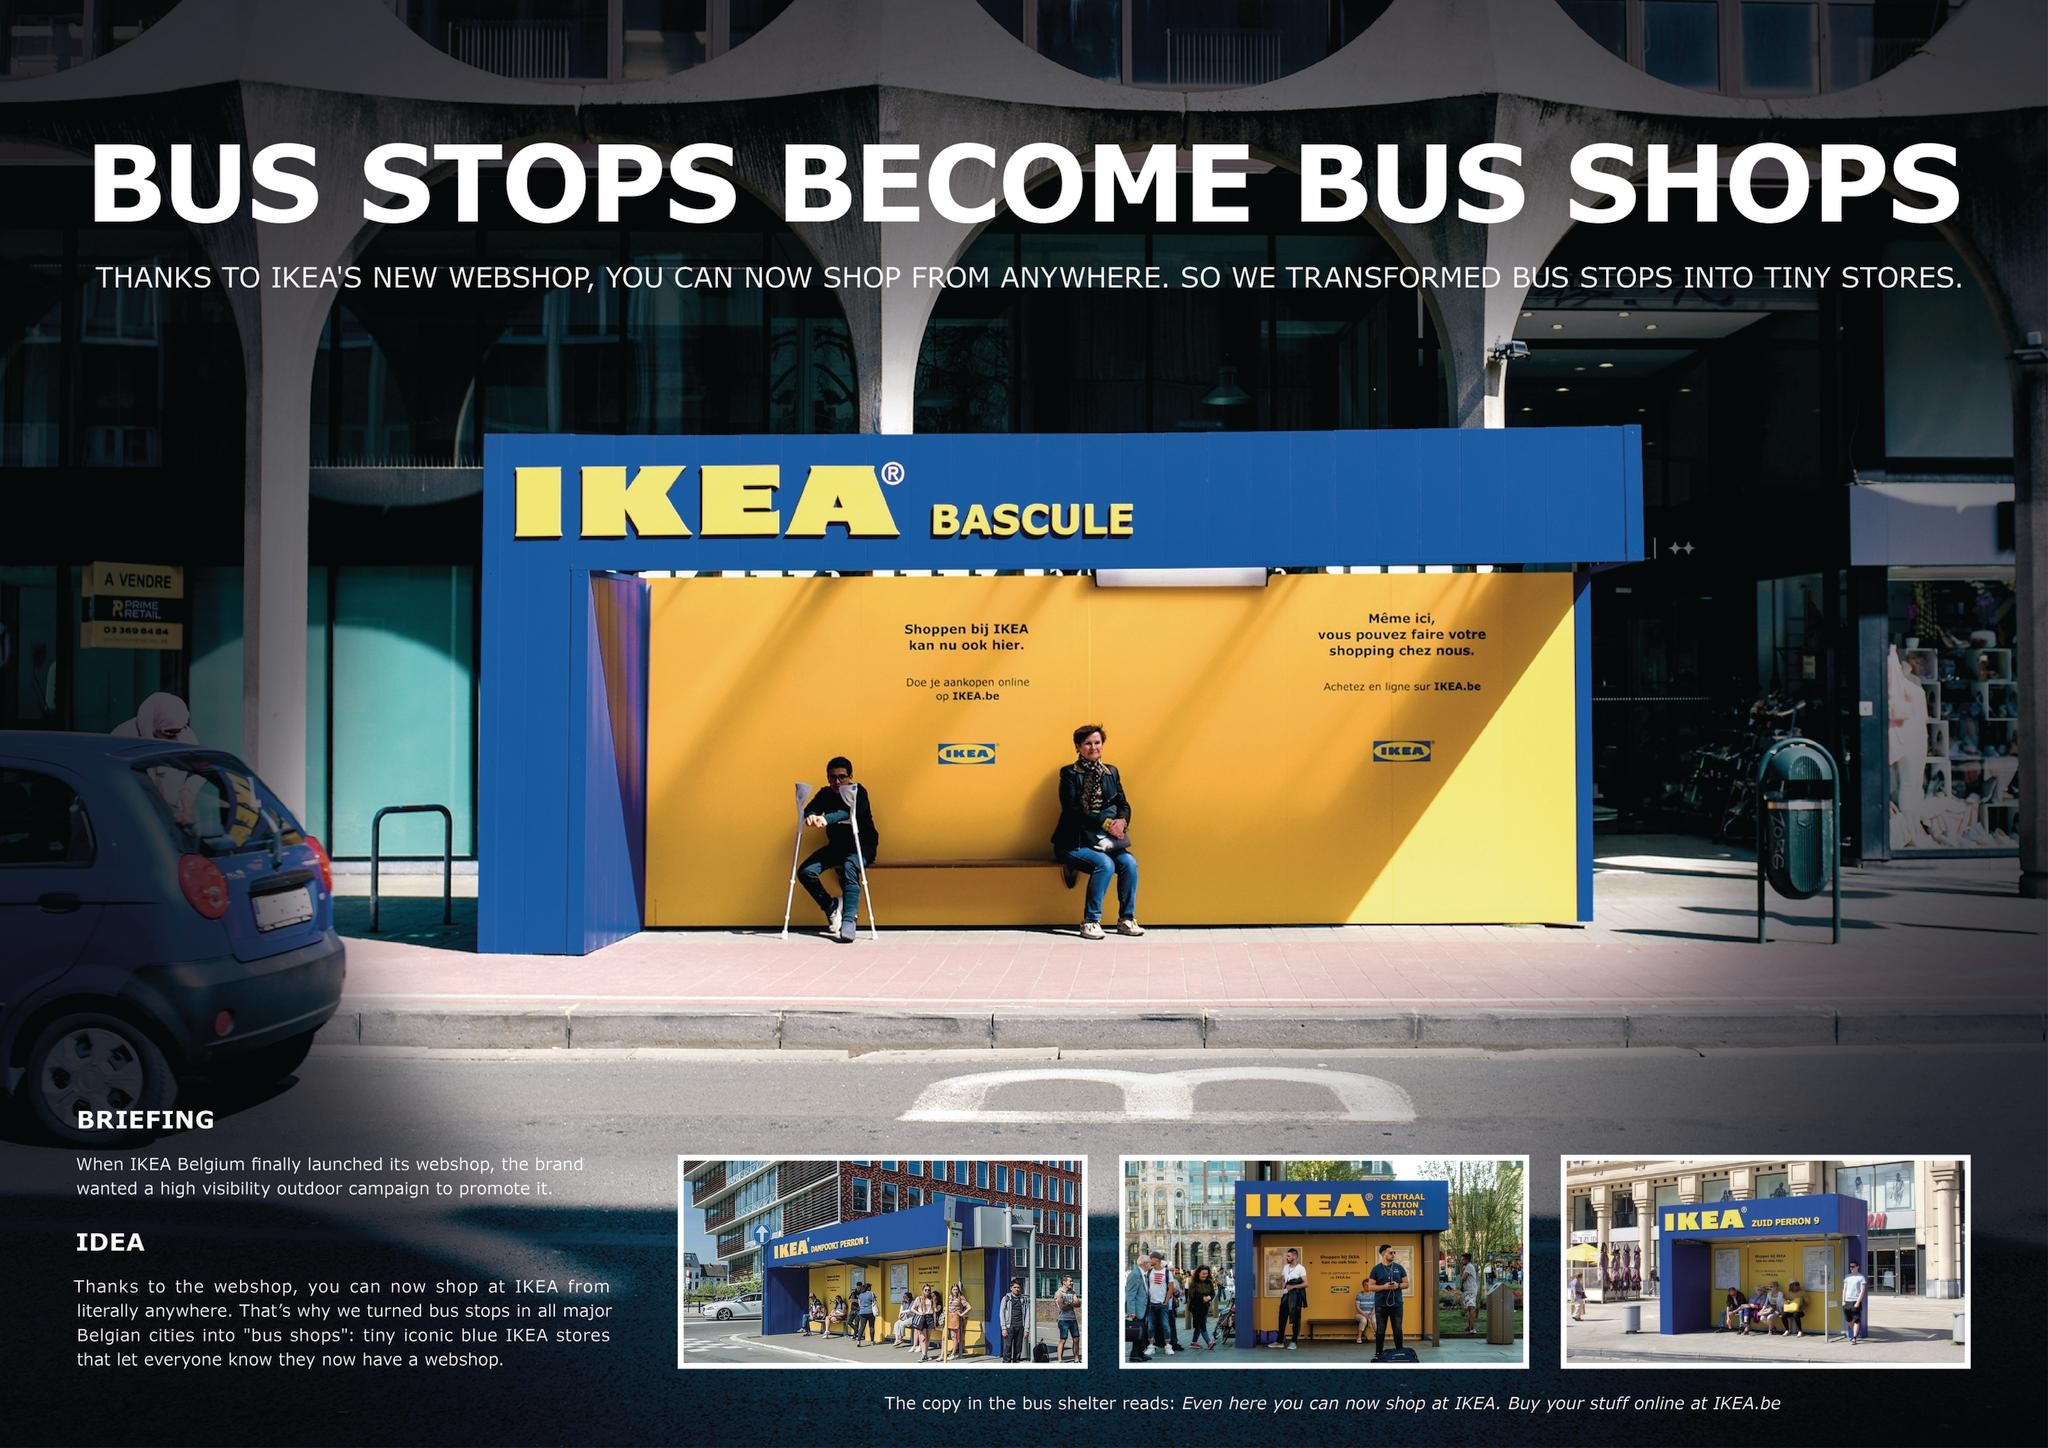 Bus stops become bus shops